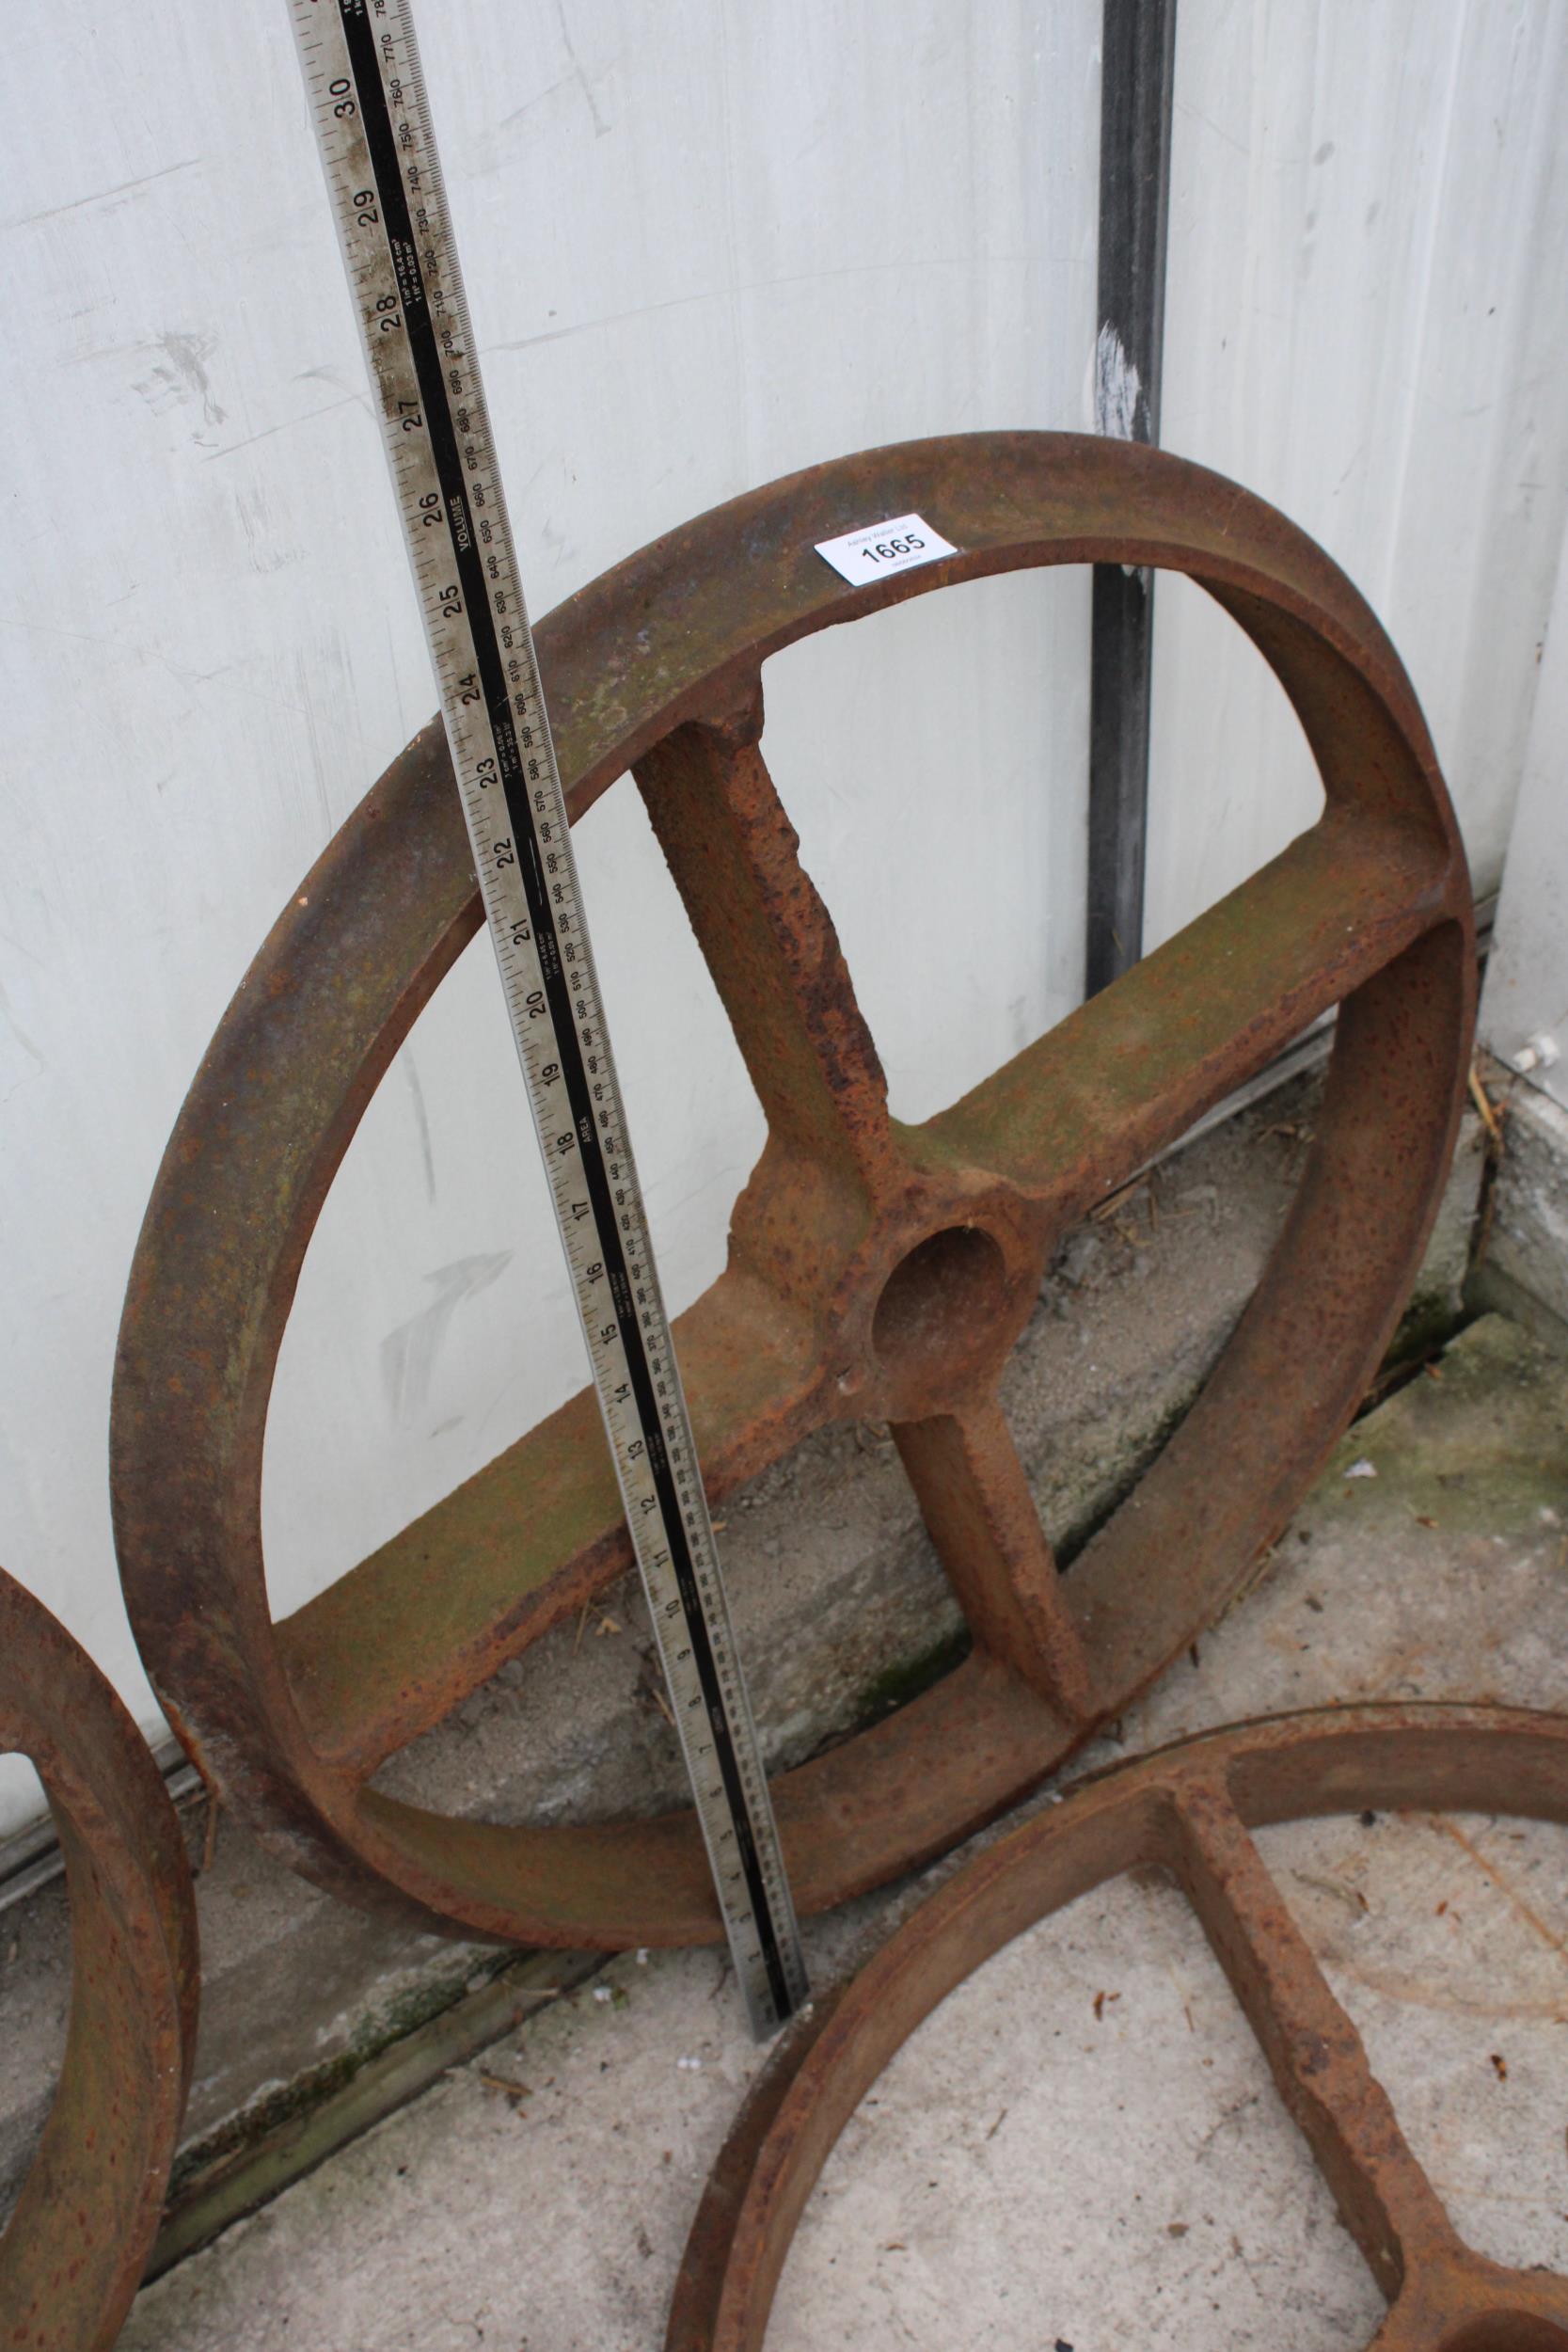 A PAIR OF VINTAGE CAST IRON TRAIN WHEELS - Image 2 of 2